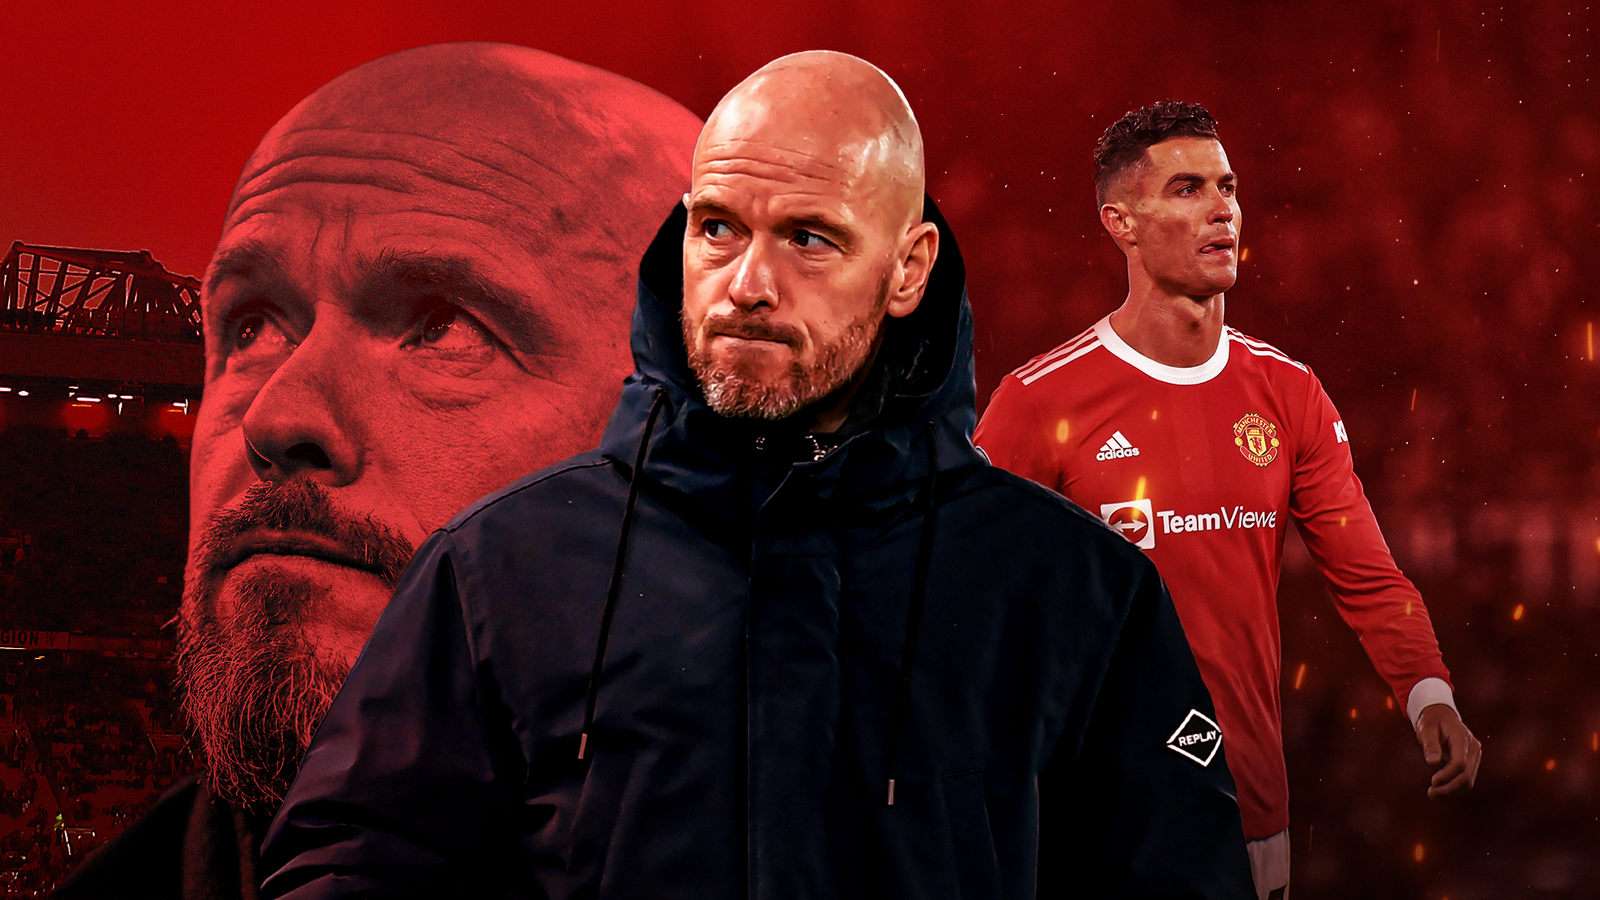 Cristiano Ronaldo: Why Manchester United forward is likely to stay at Old Trafford under Erik ten Hag